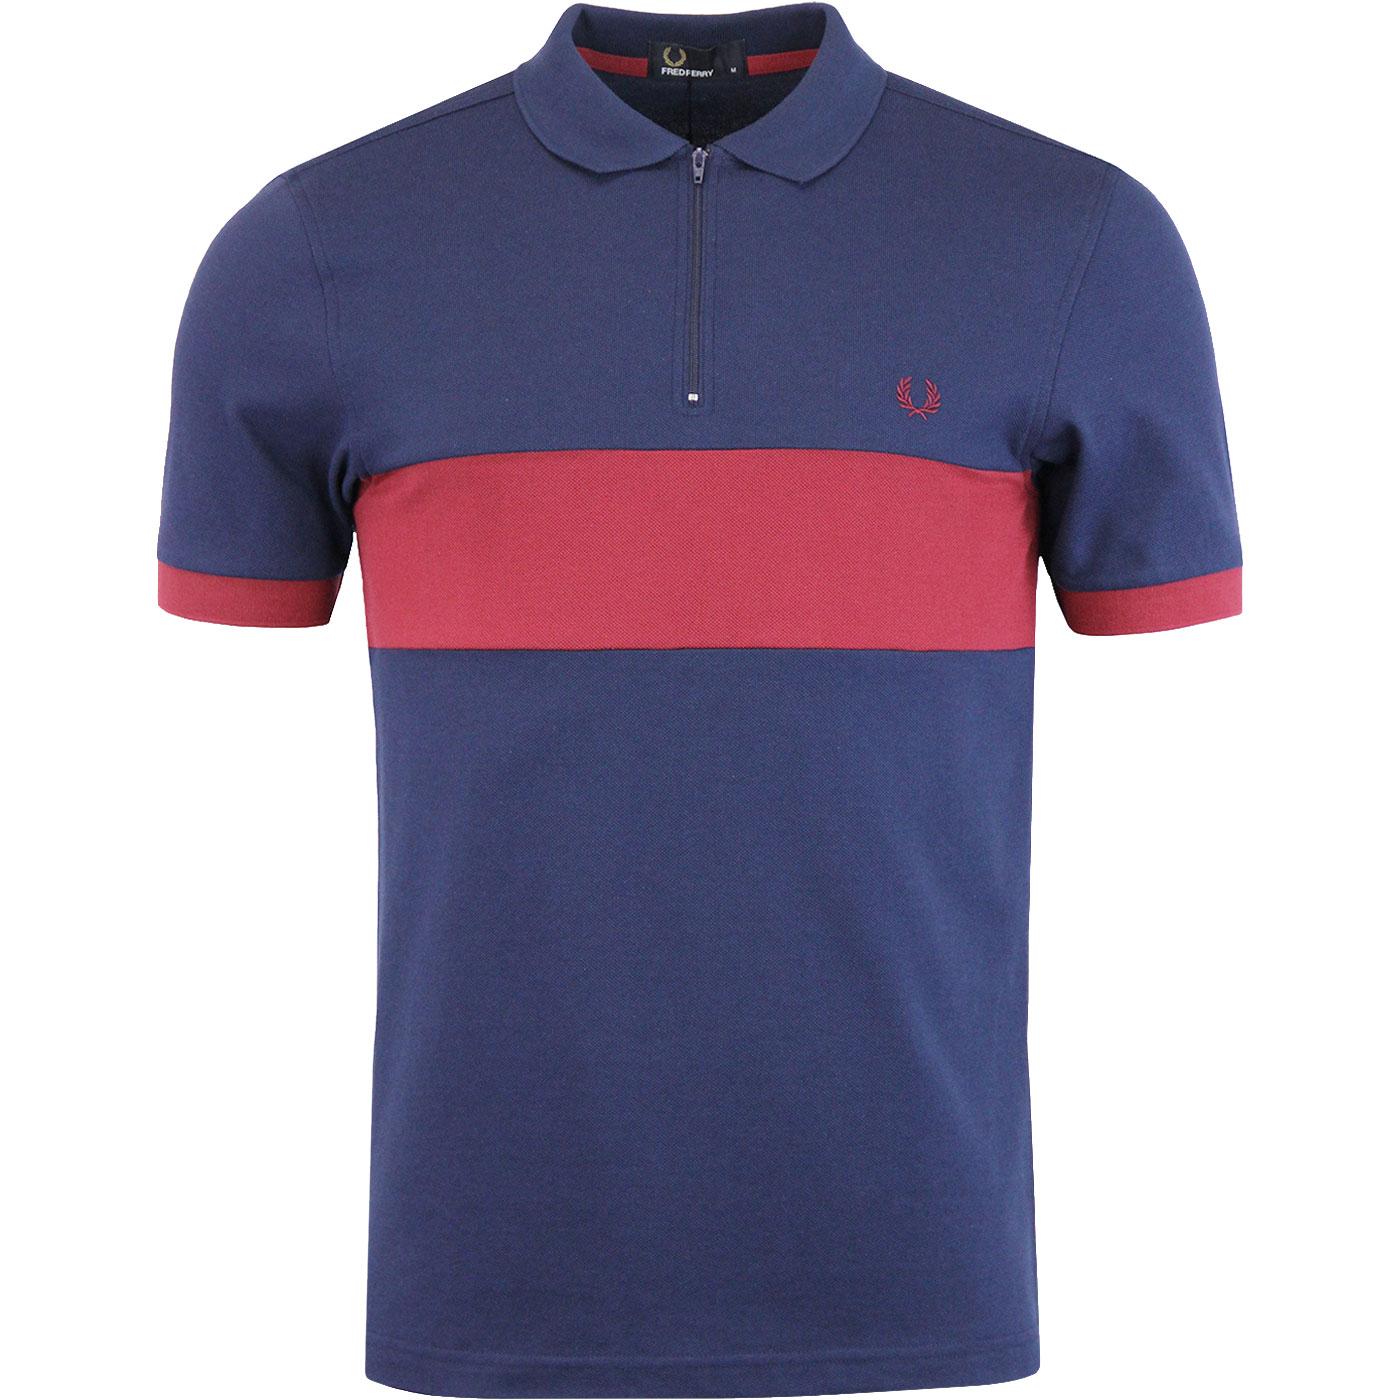 FRED PERRY Chest Panel Zip Neck Pique Polo in Carbon Blue